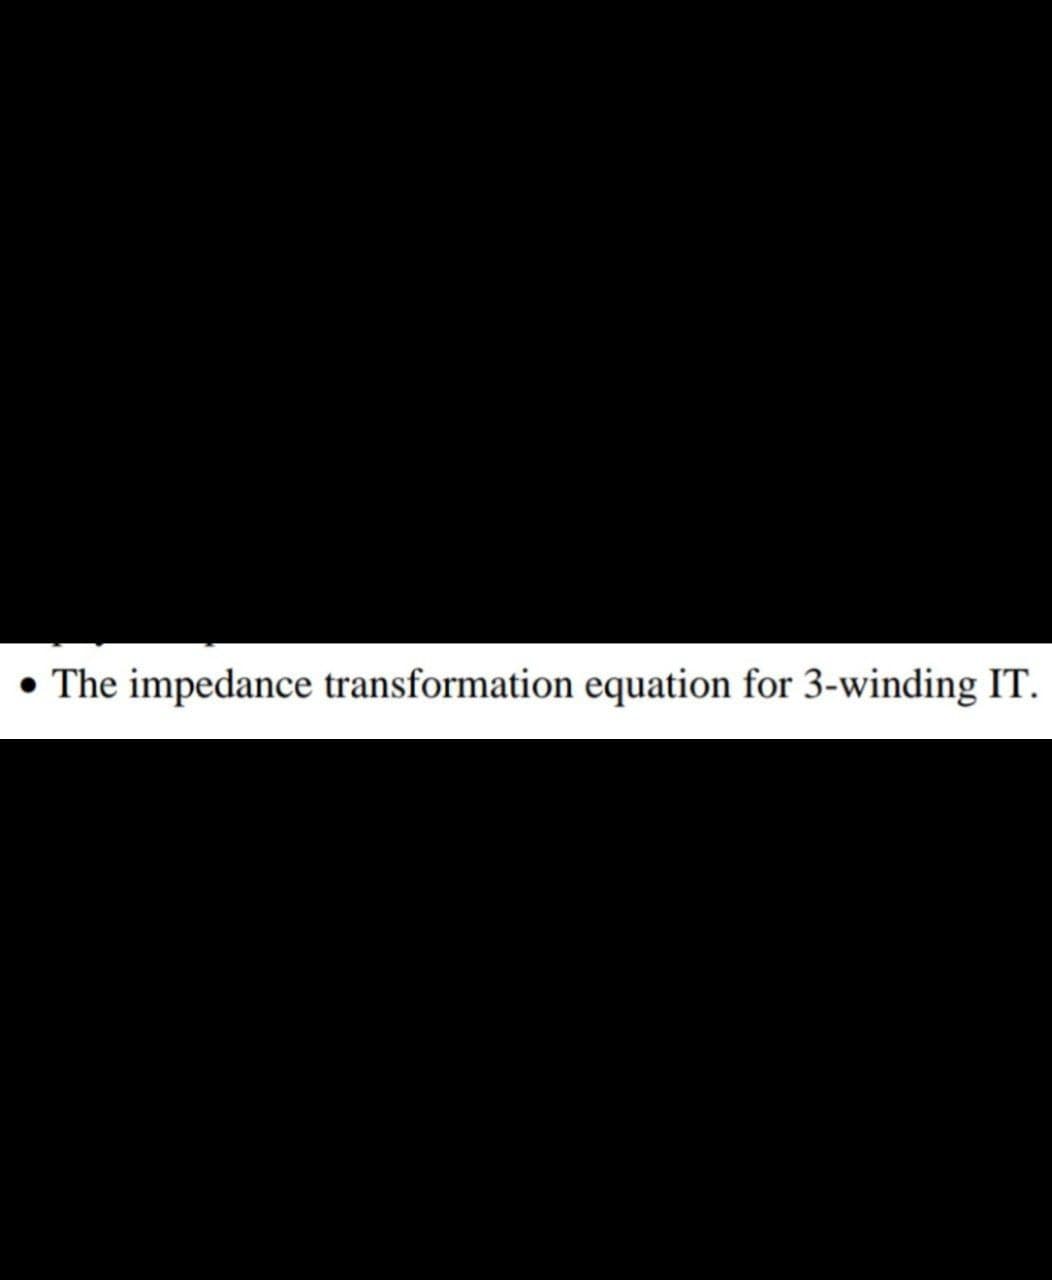 The impedance transformation equation for 3-winding IT.
